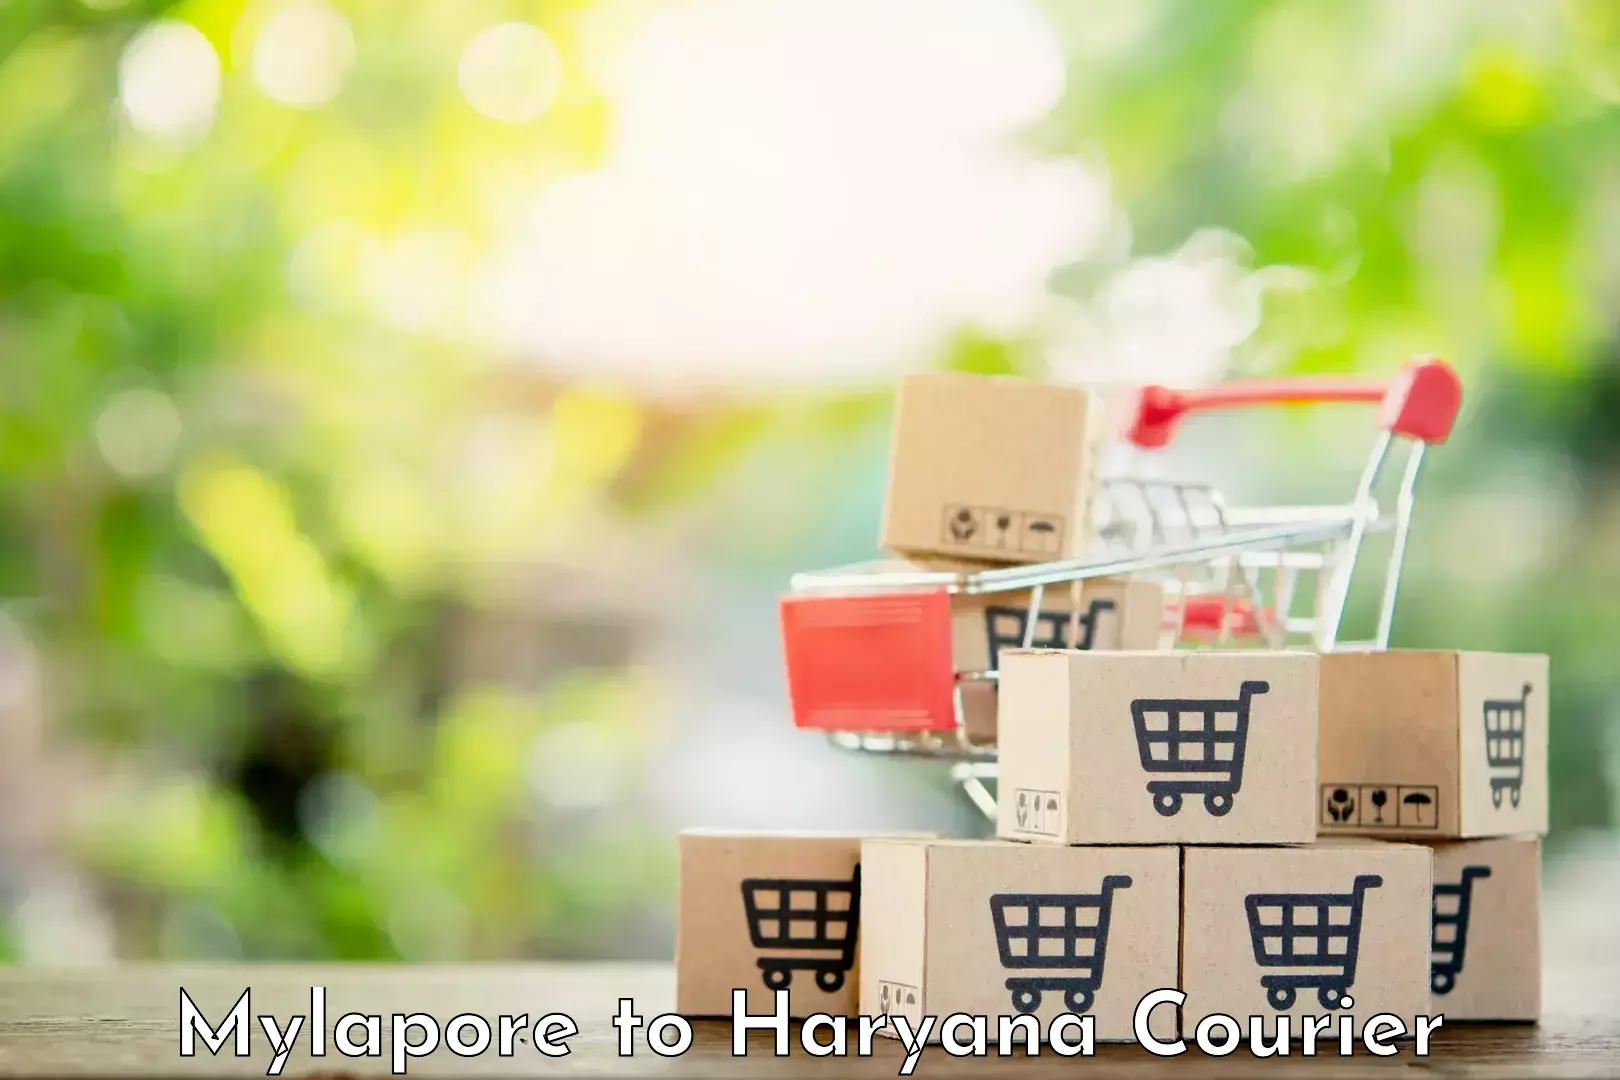 Same-day delivery solutions Mylapore to Haryana